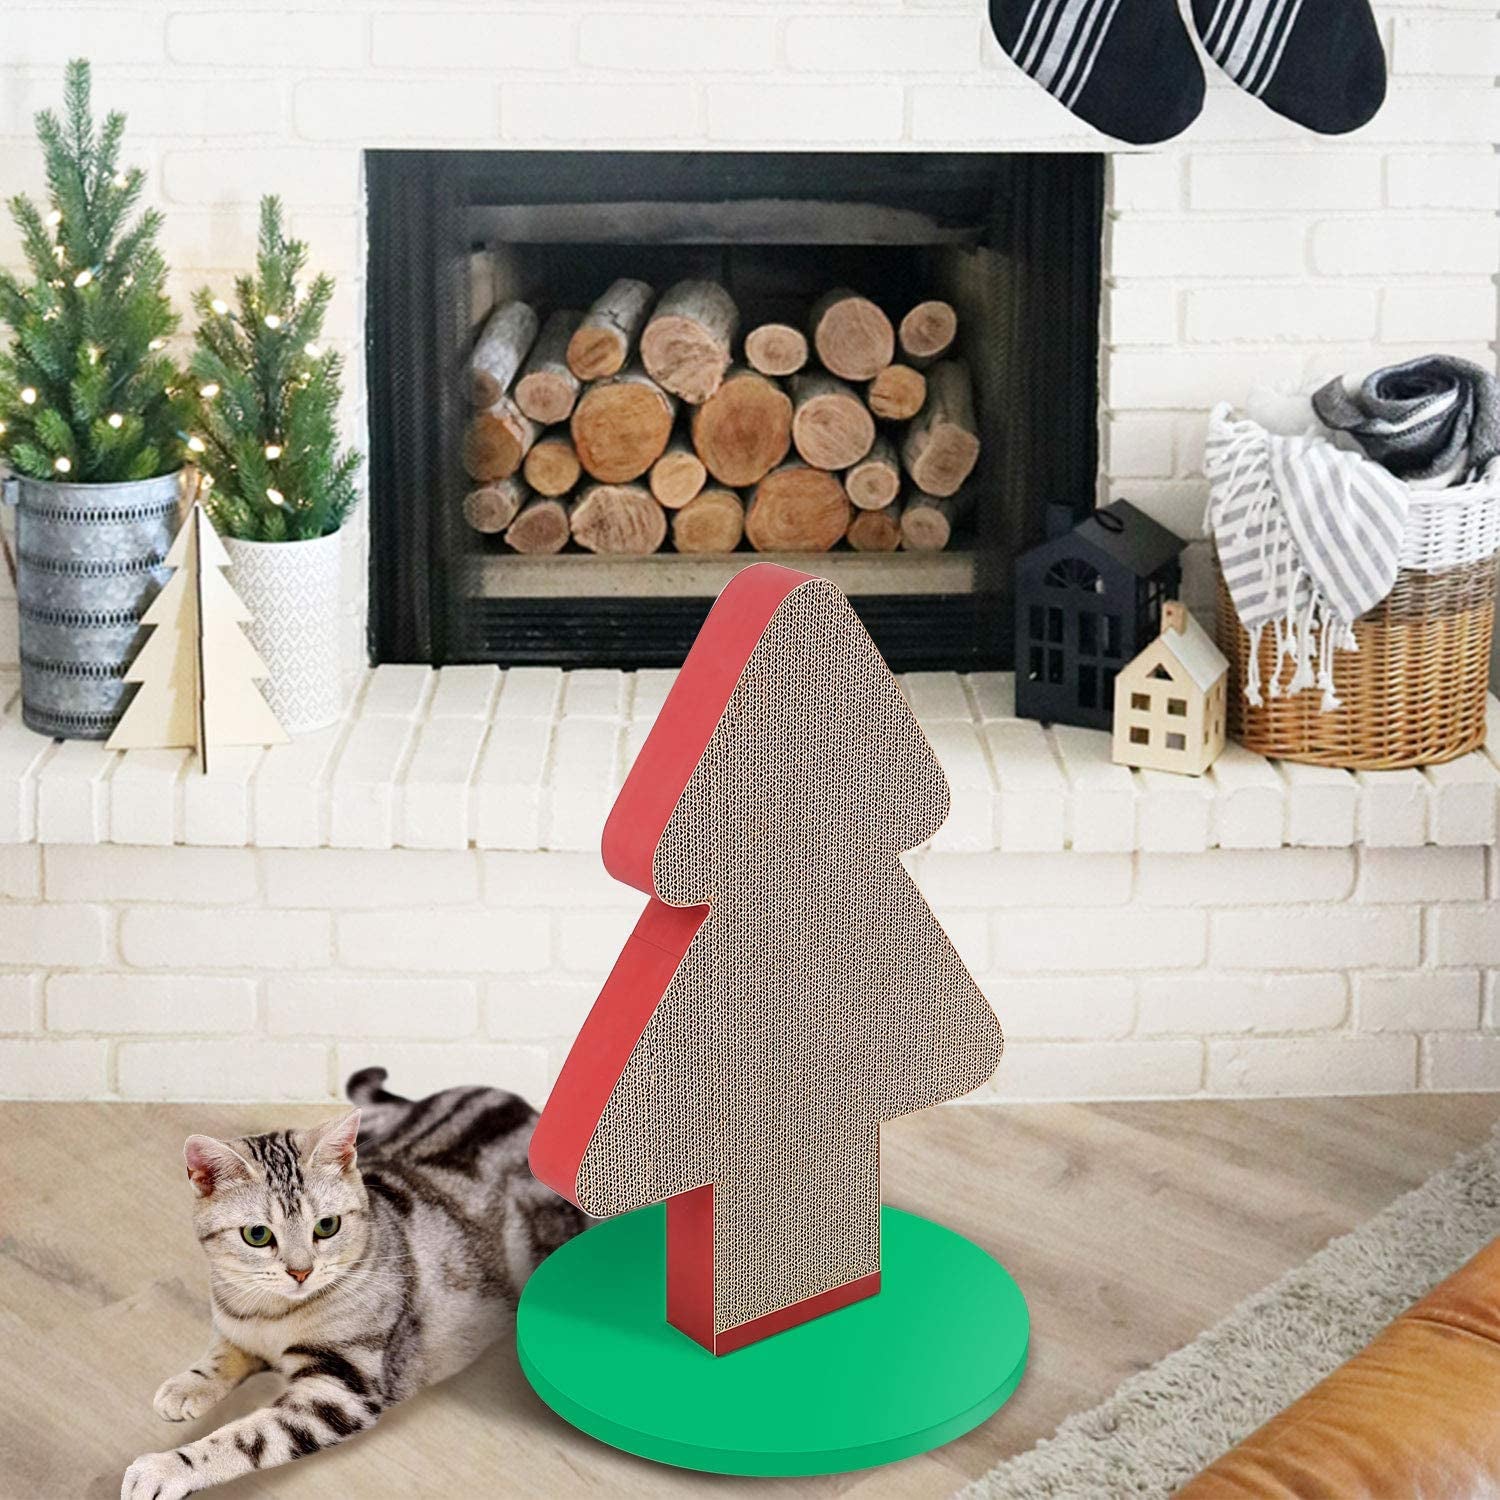 Scratchme Cat Scratcher Post Cardboard, Christmas Tree Shape Cat Scratching Lounge Bed, Durable Pad Prevents Furniture Damage, 1-Pack